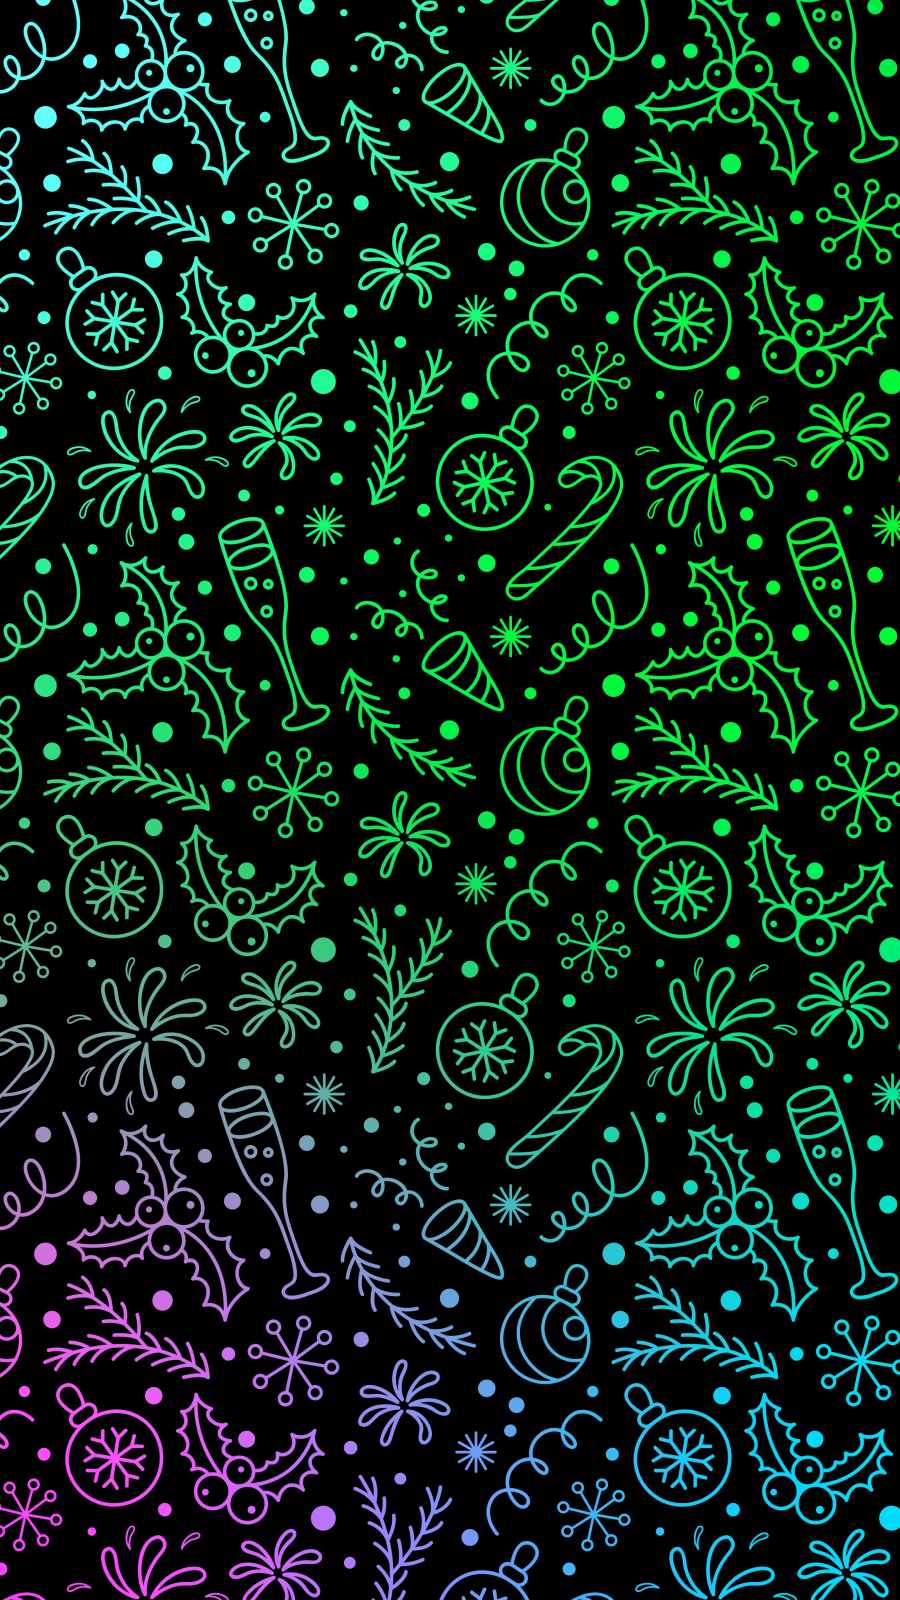 Holiday Iphone Wallpapers